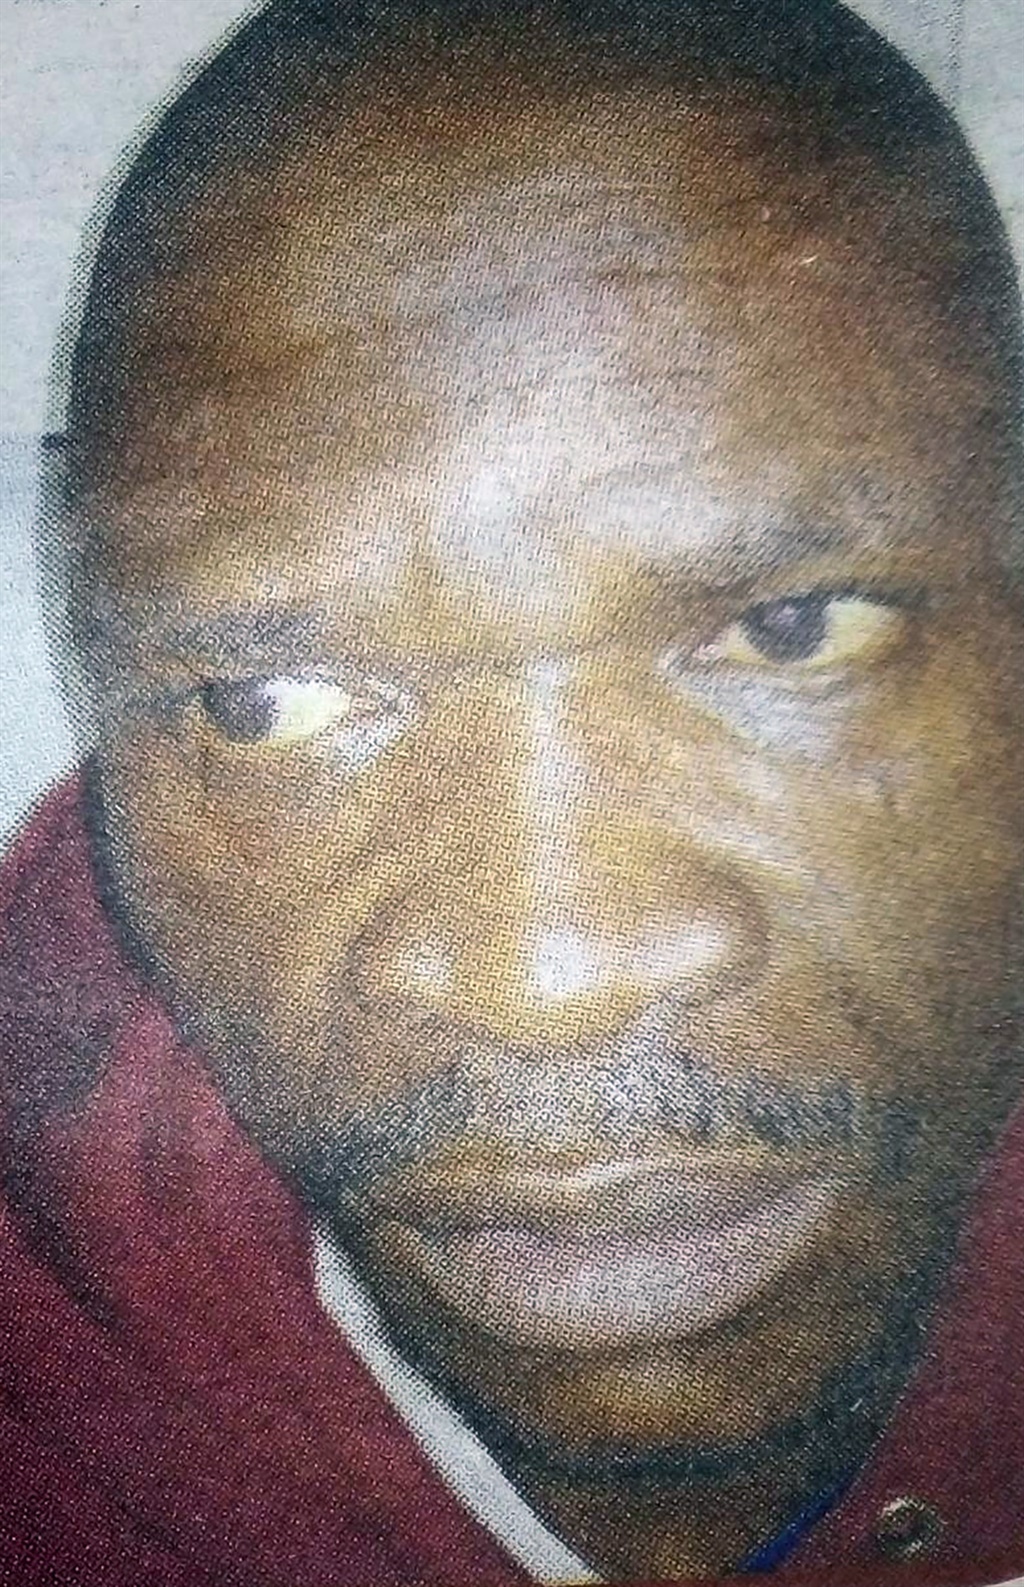 Mduduzi Khomo who was arrested for the death of women in UMthwalume. Photo Supplied